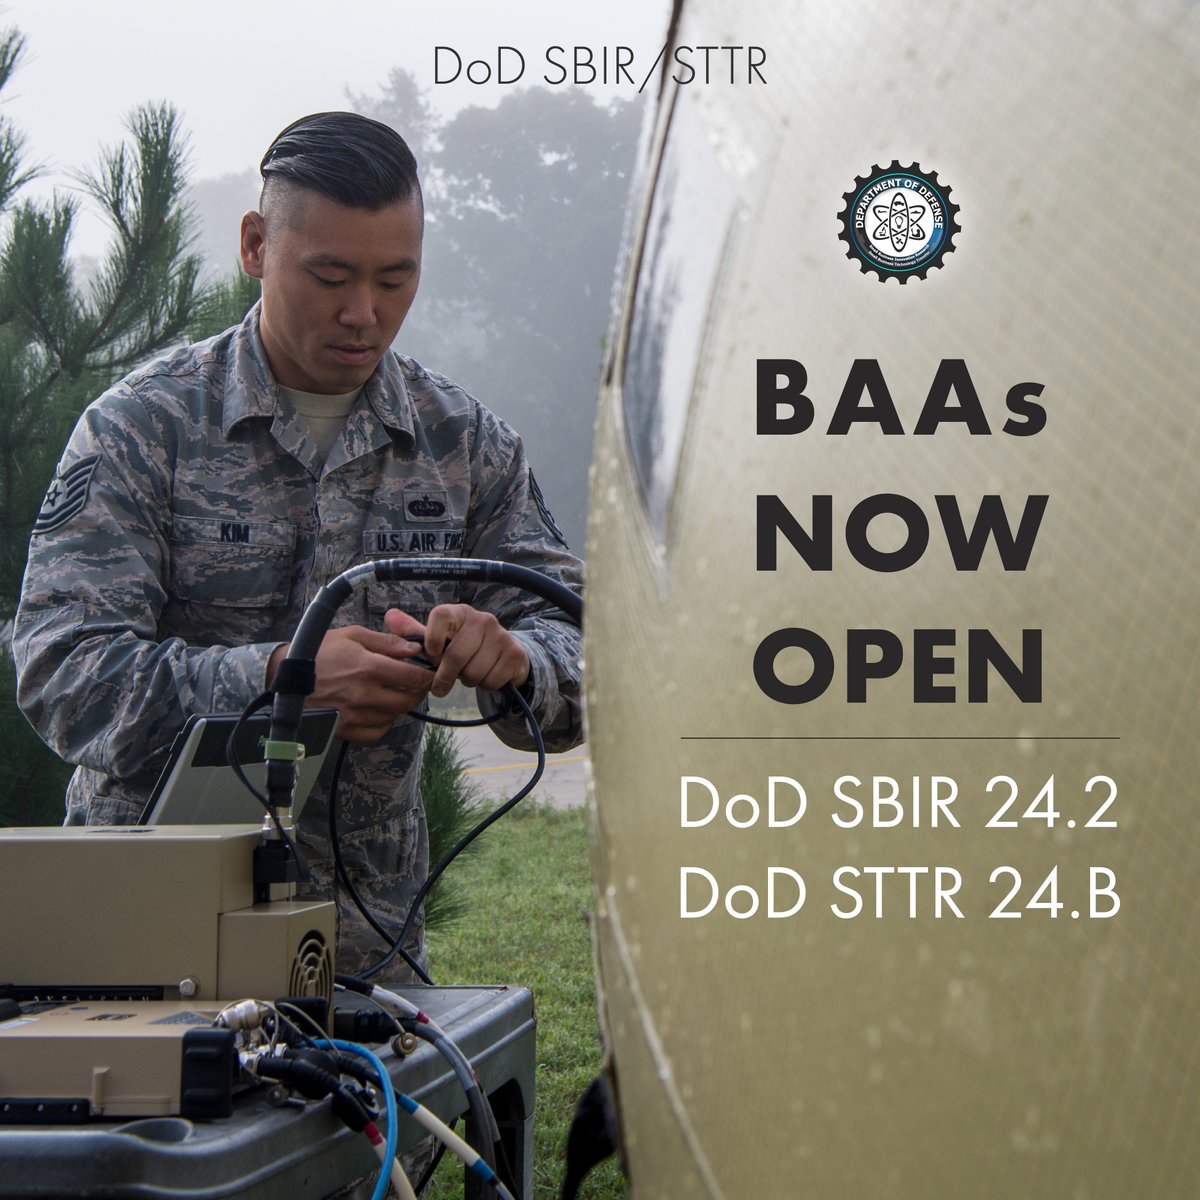 NOW OPEN! Calling small businesses and innovators, Broad Agency Announcements (BAAs) DoD SBIR 24.2 and DoD STTR 24.B are open and accepting your proposal submissions in the Defense SBIR/STTR Innovation Portal (DSIP) until June 12 at 12:00 p.m. ET. #DoDInnovates #SBIR #STTR